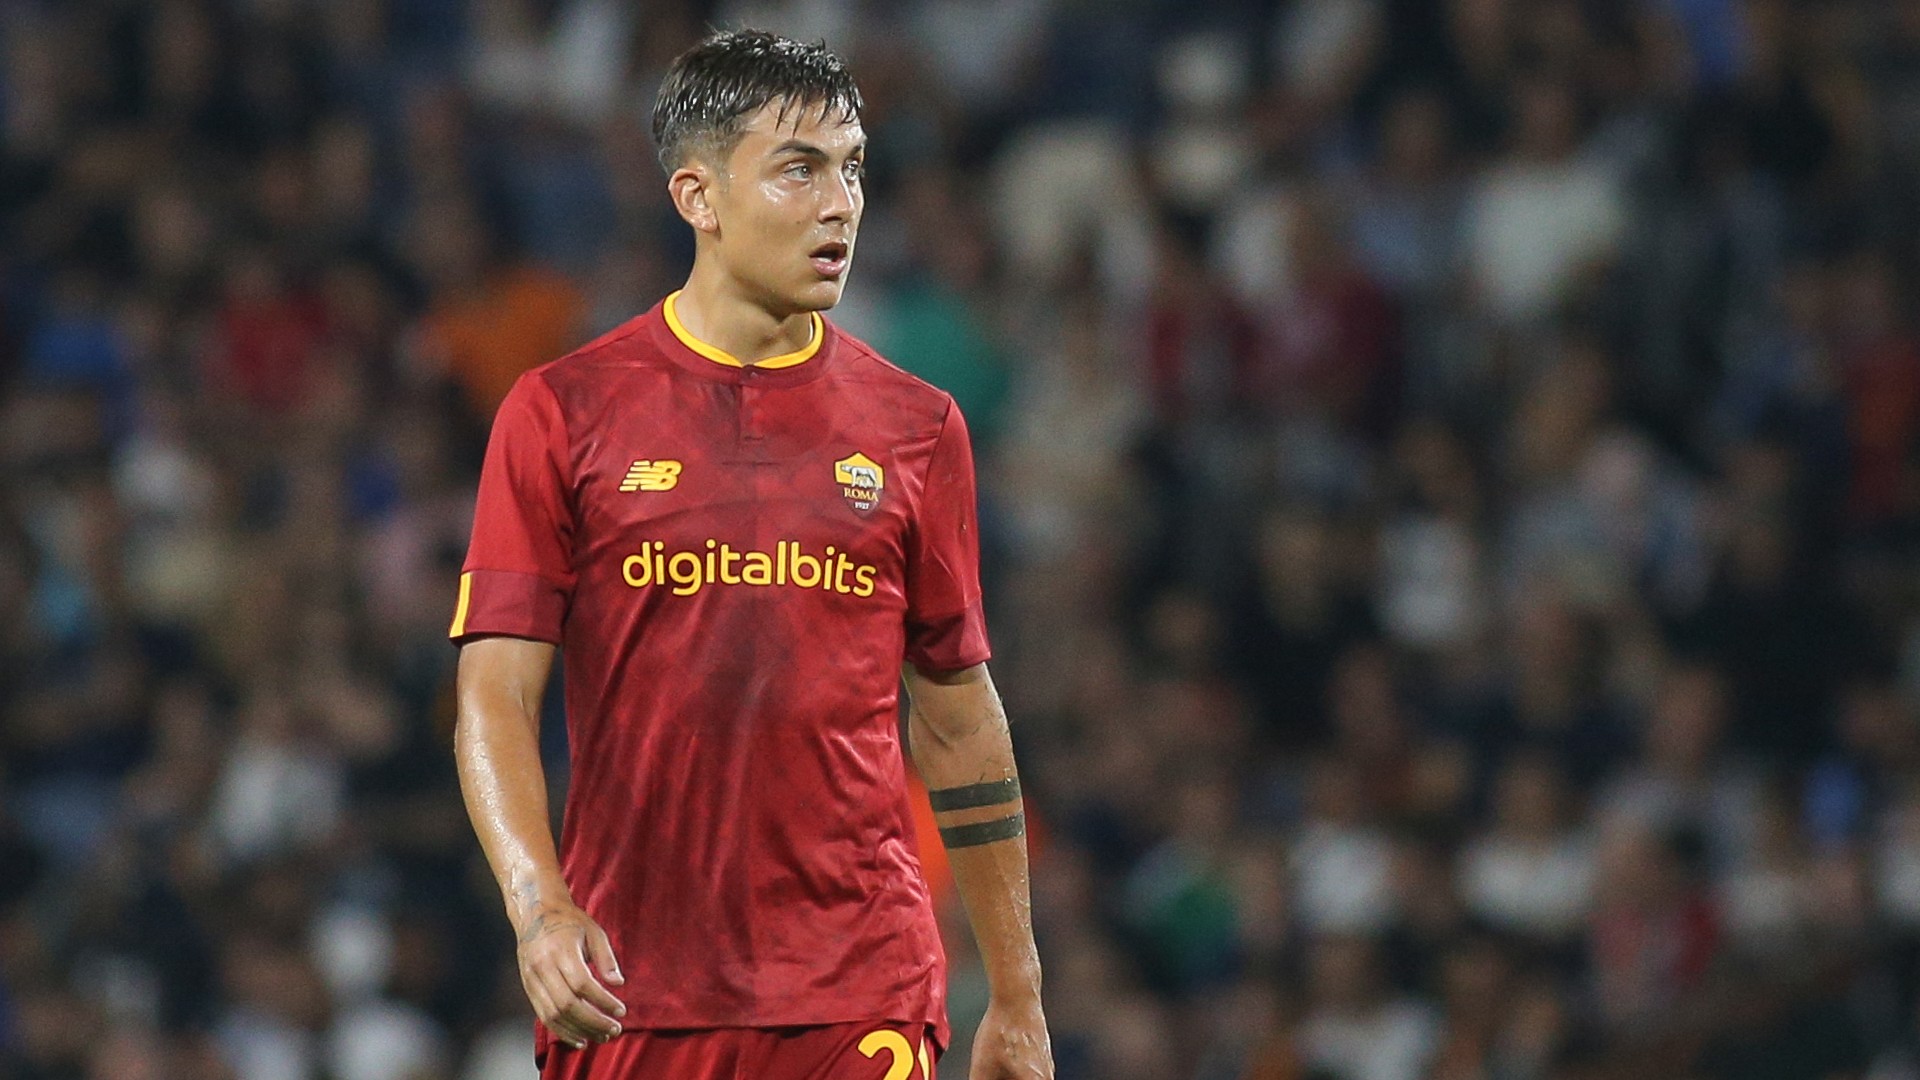 Capello compares Dybala to Roma legend Totti but says Abraham not yet on Batistuta's level